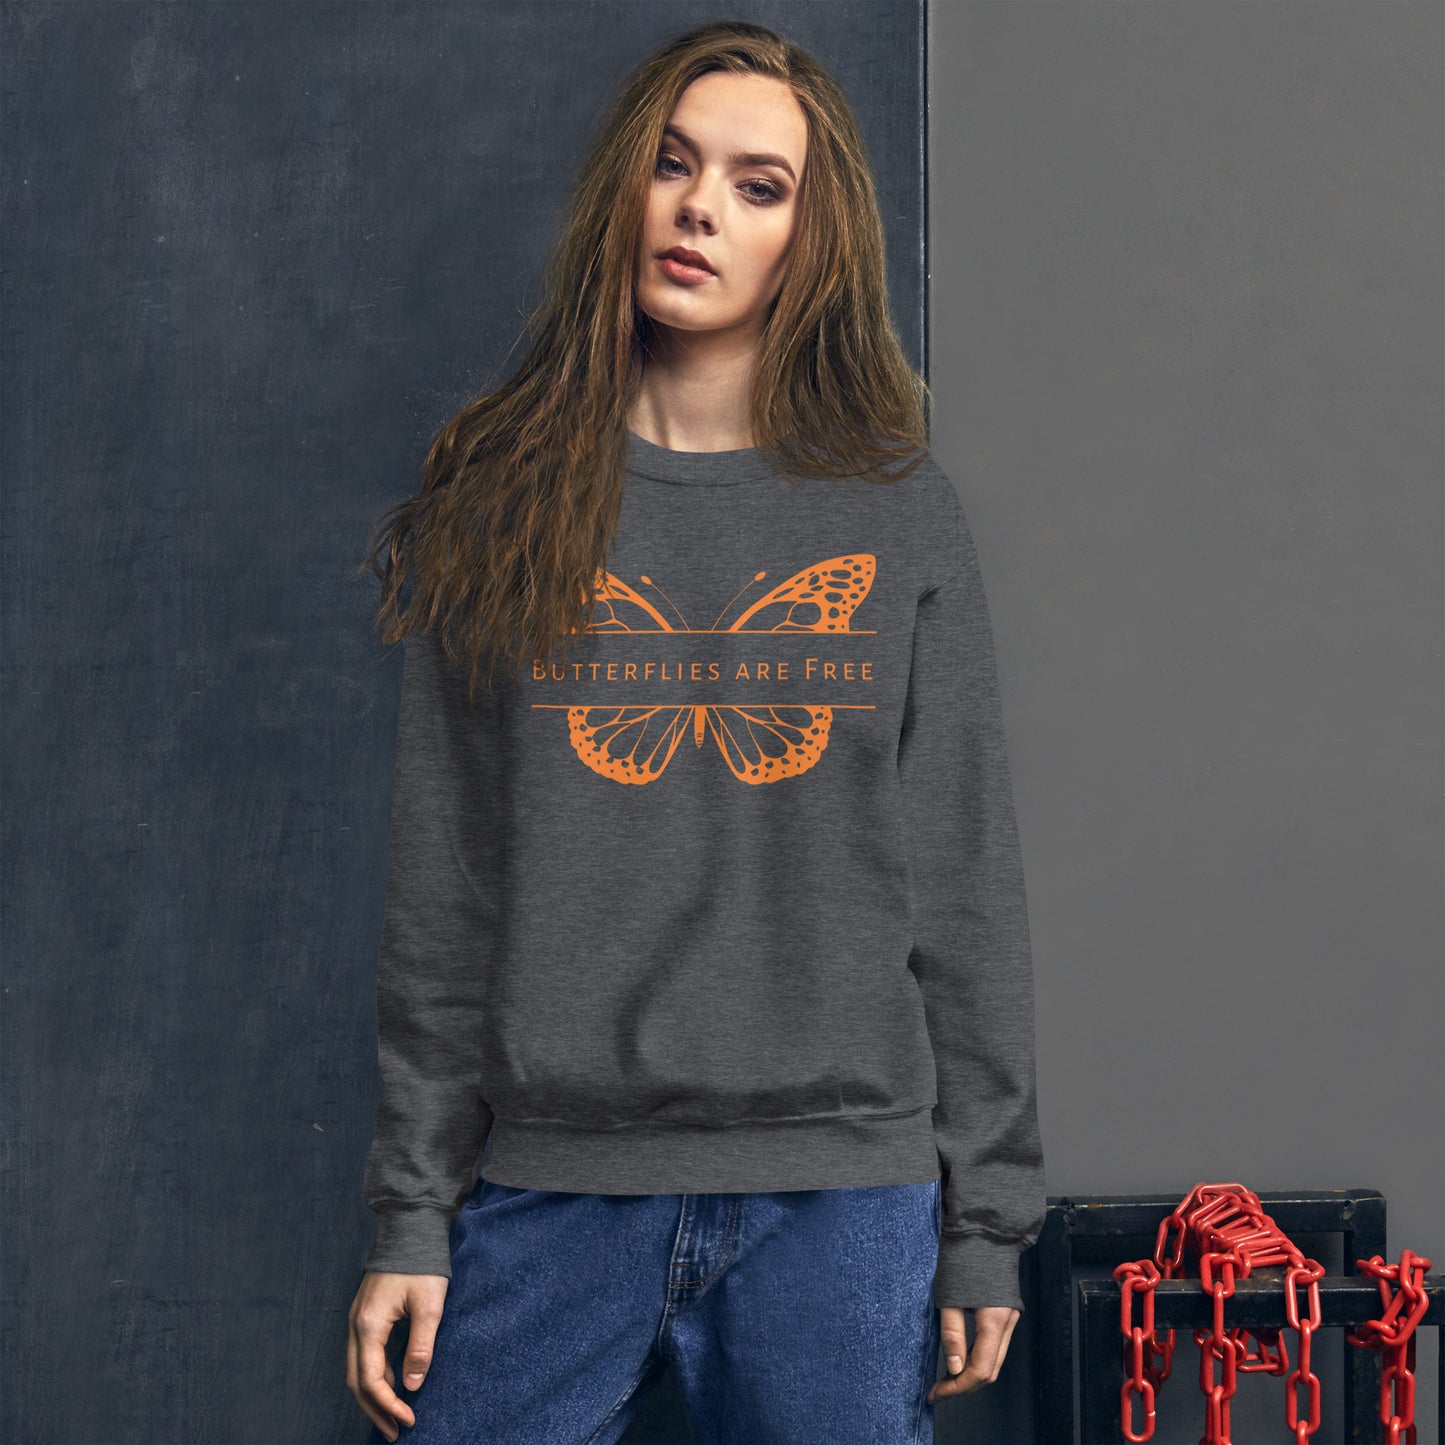 Butterflies Are Free Unisex Sweatshirt, Positive Inspirational Message, Be Free, Live Life as You Wish